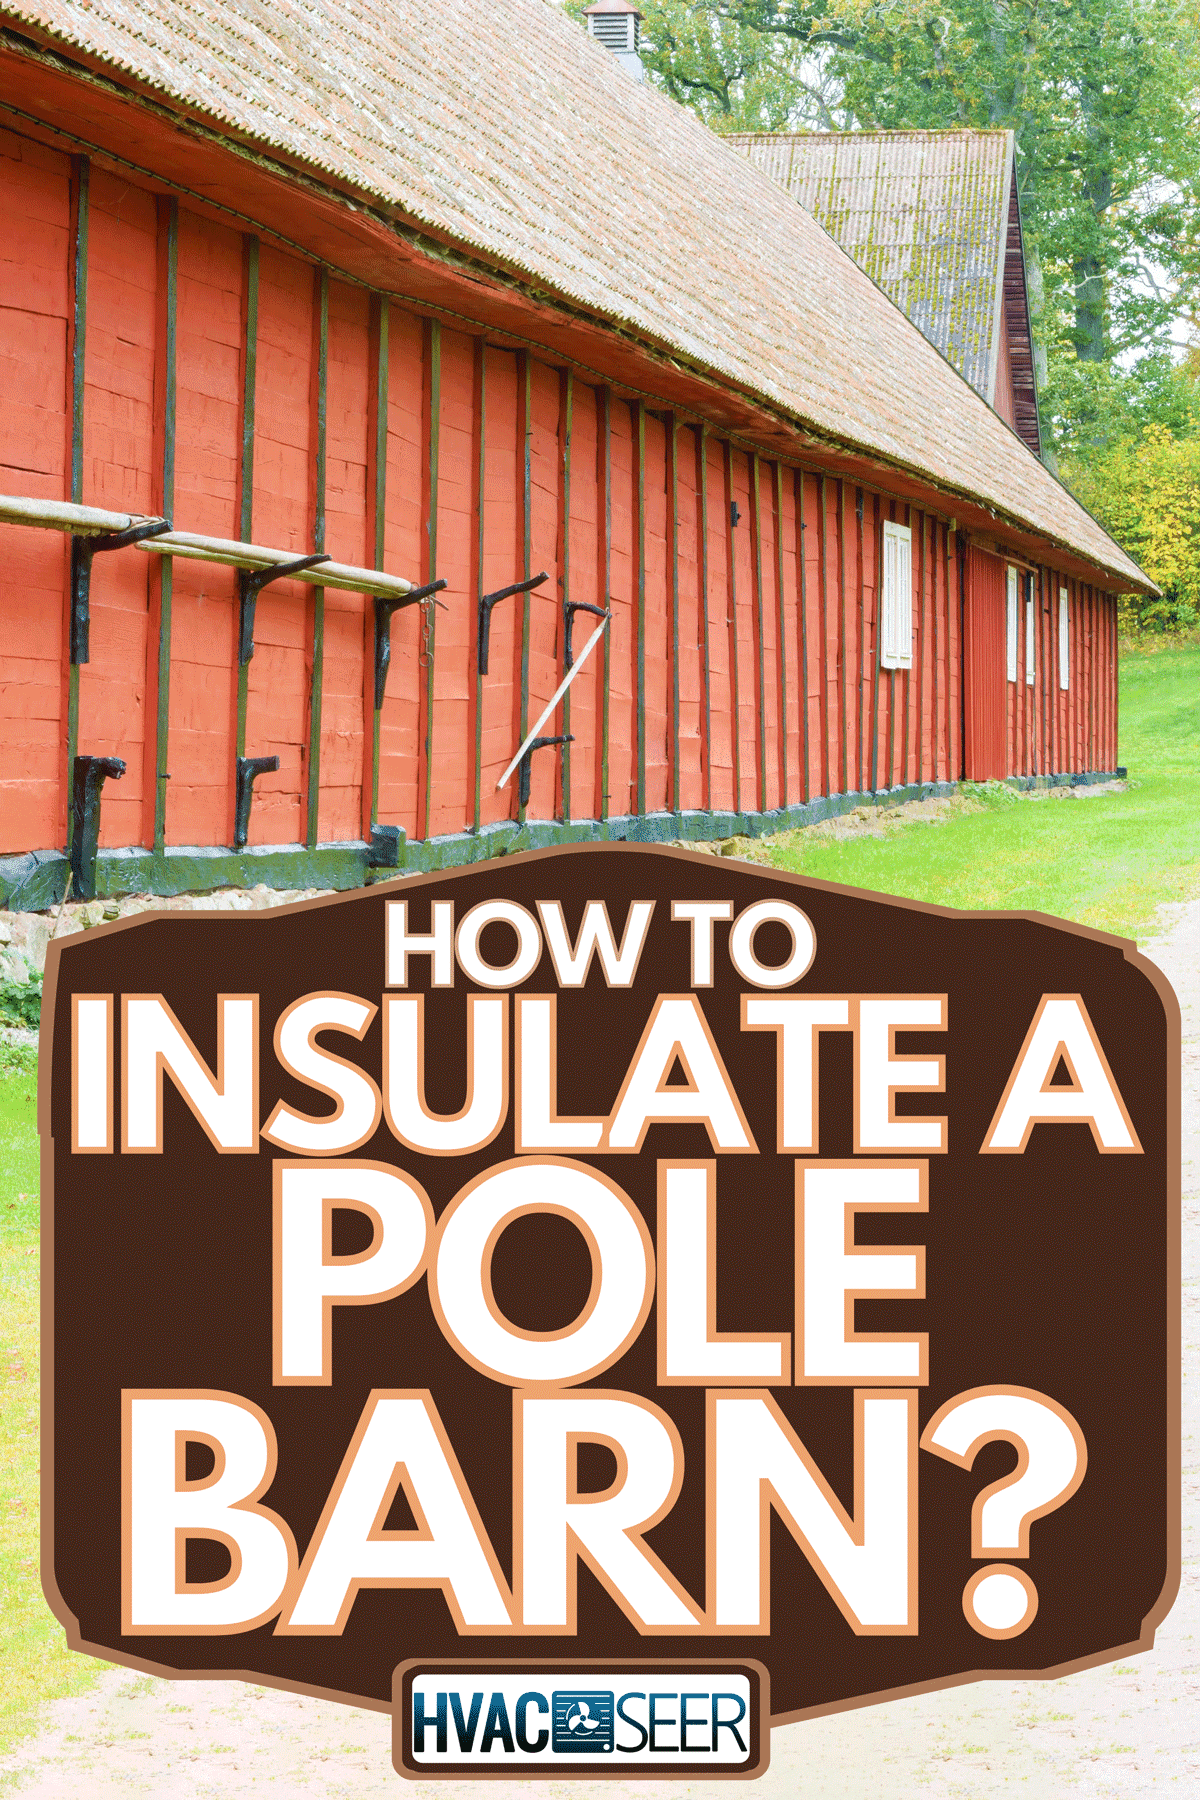 Red wooden barn building with racks and poles on wall, How To Insulate A Pole Barn?